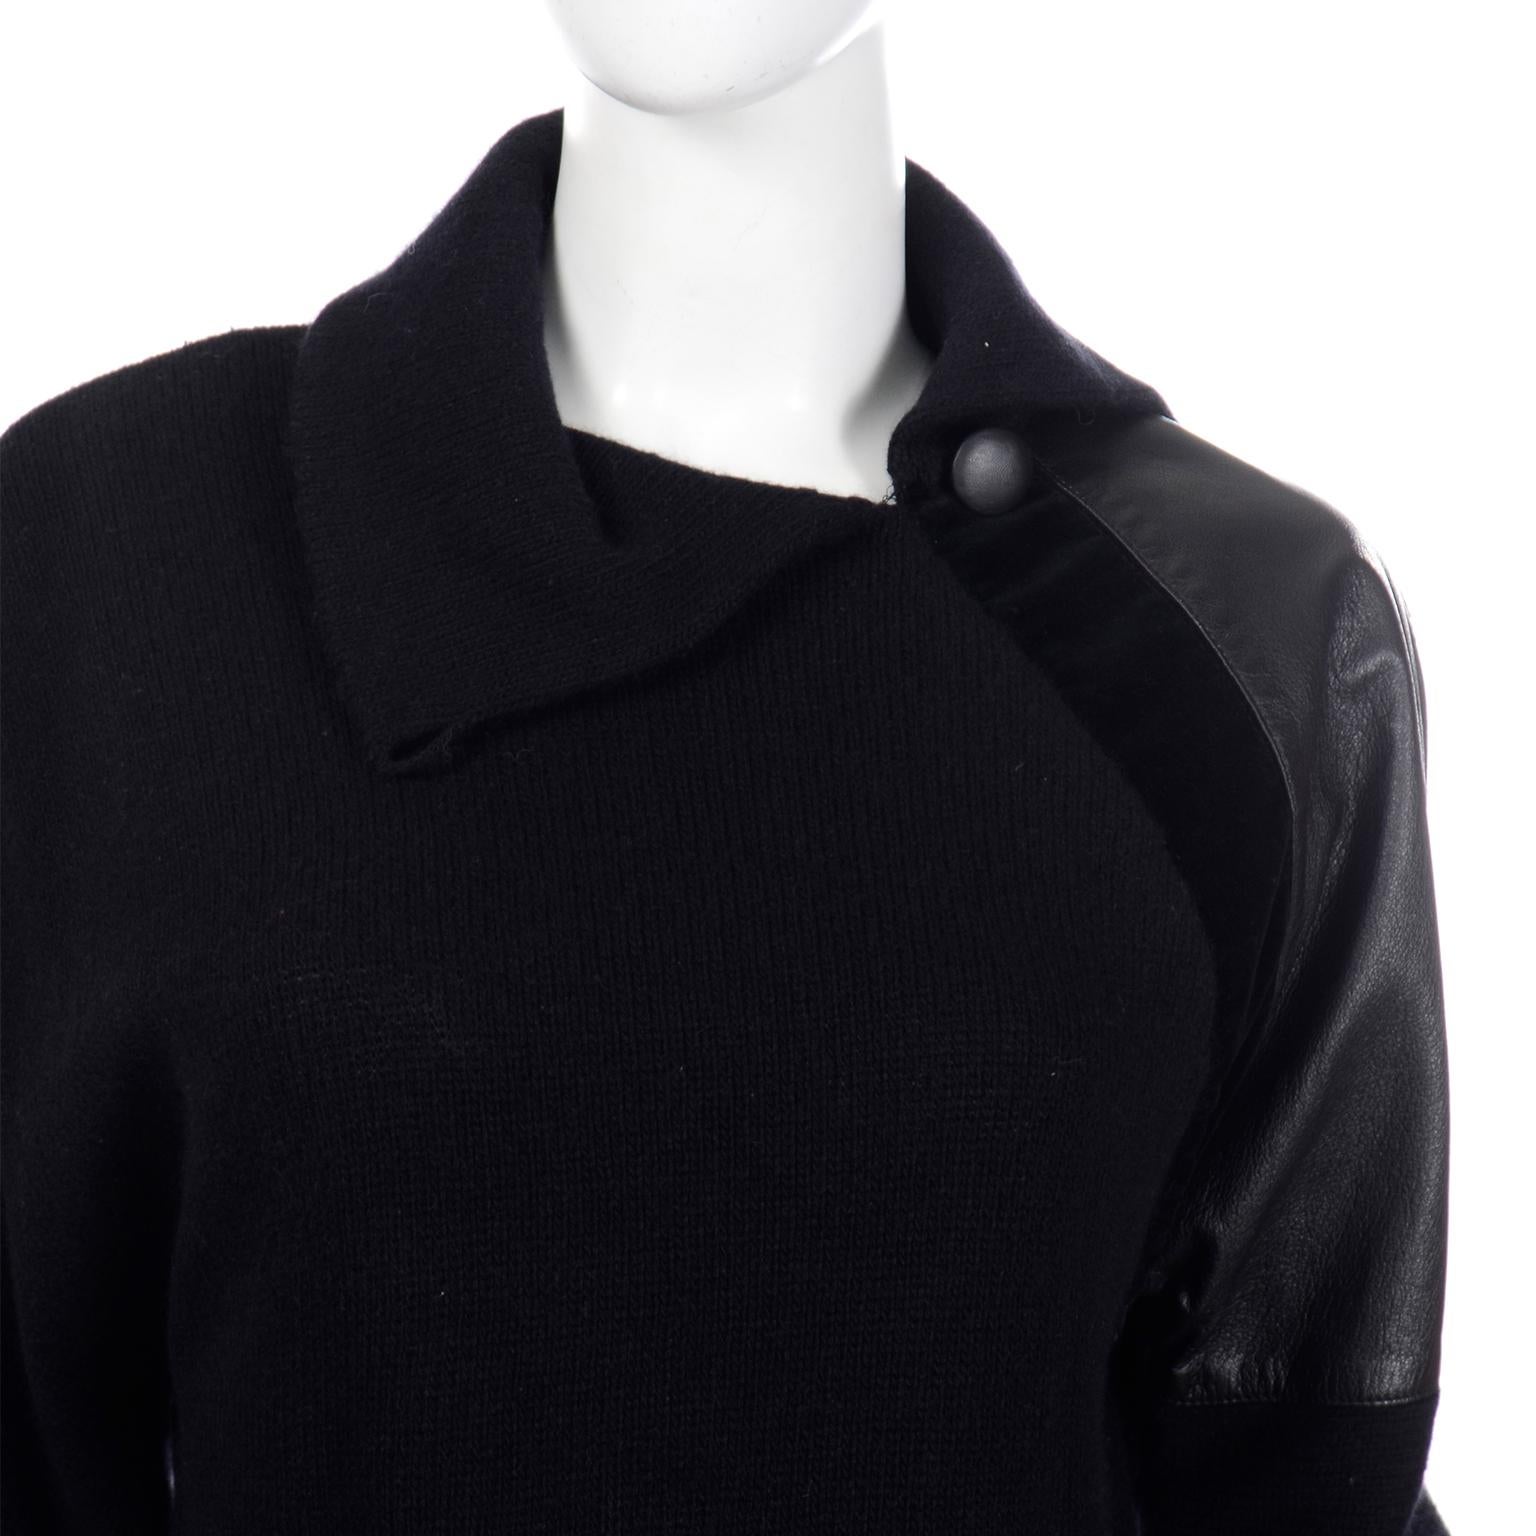 Gianfranco Ferre Vintage Black Wool and Leather Sweater Top 3